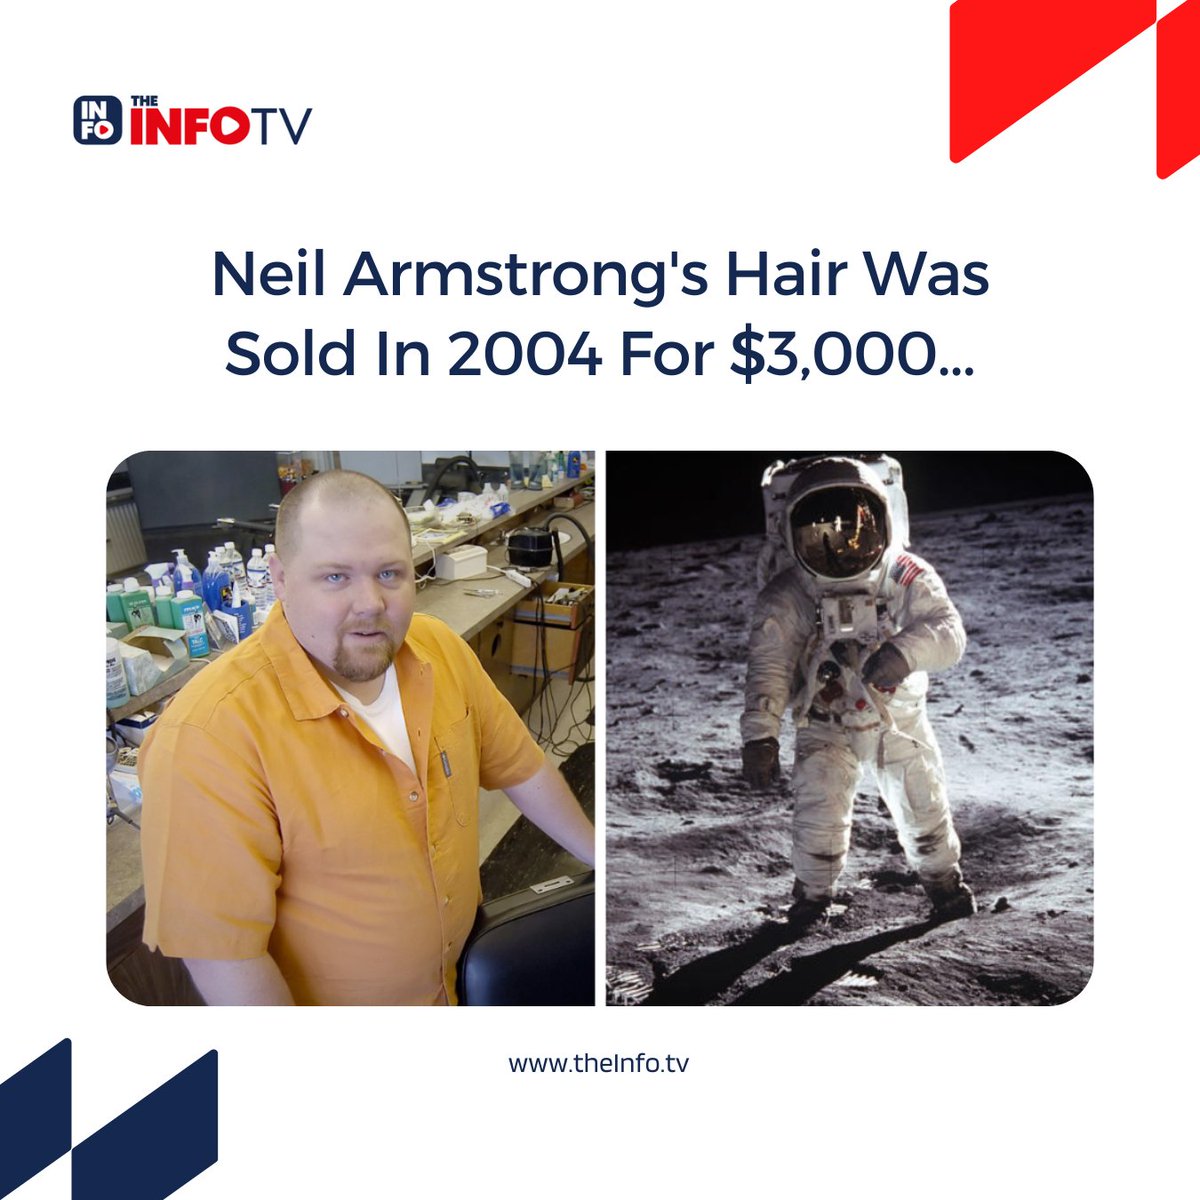 #WeirdFacts | In May 2004, Marx Sizemore sold Armstrong's hair to John Reznikoff, the largest hair collector of historical celebrities.

- Armstrong threatened to take legal action against Marx. The buyer did not return the hair even after legal notice.

#NeilArmstrong #TheINFOtv